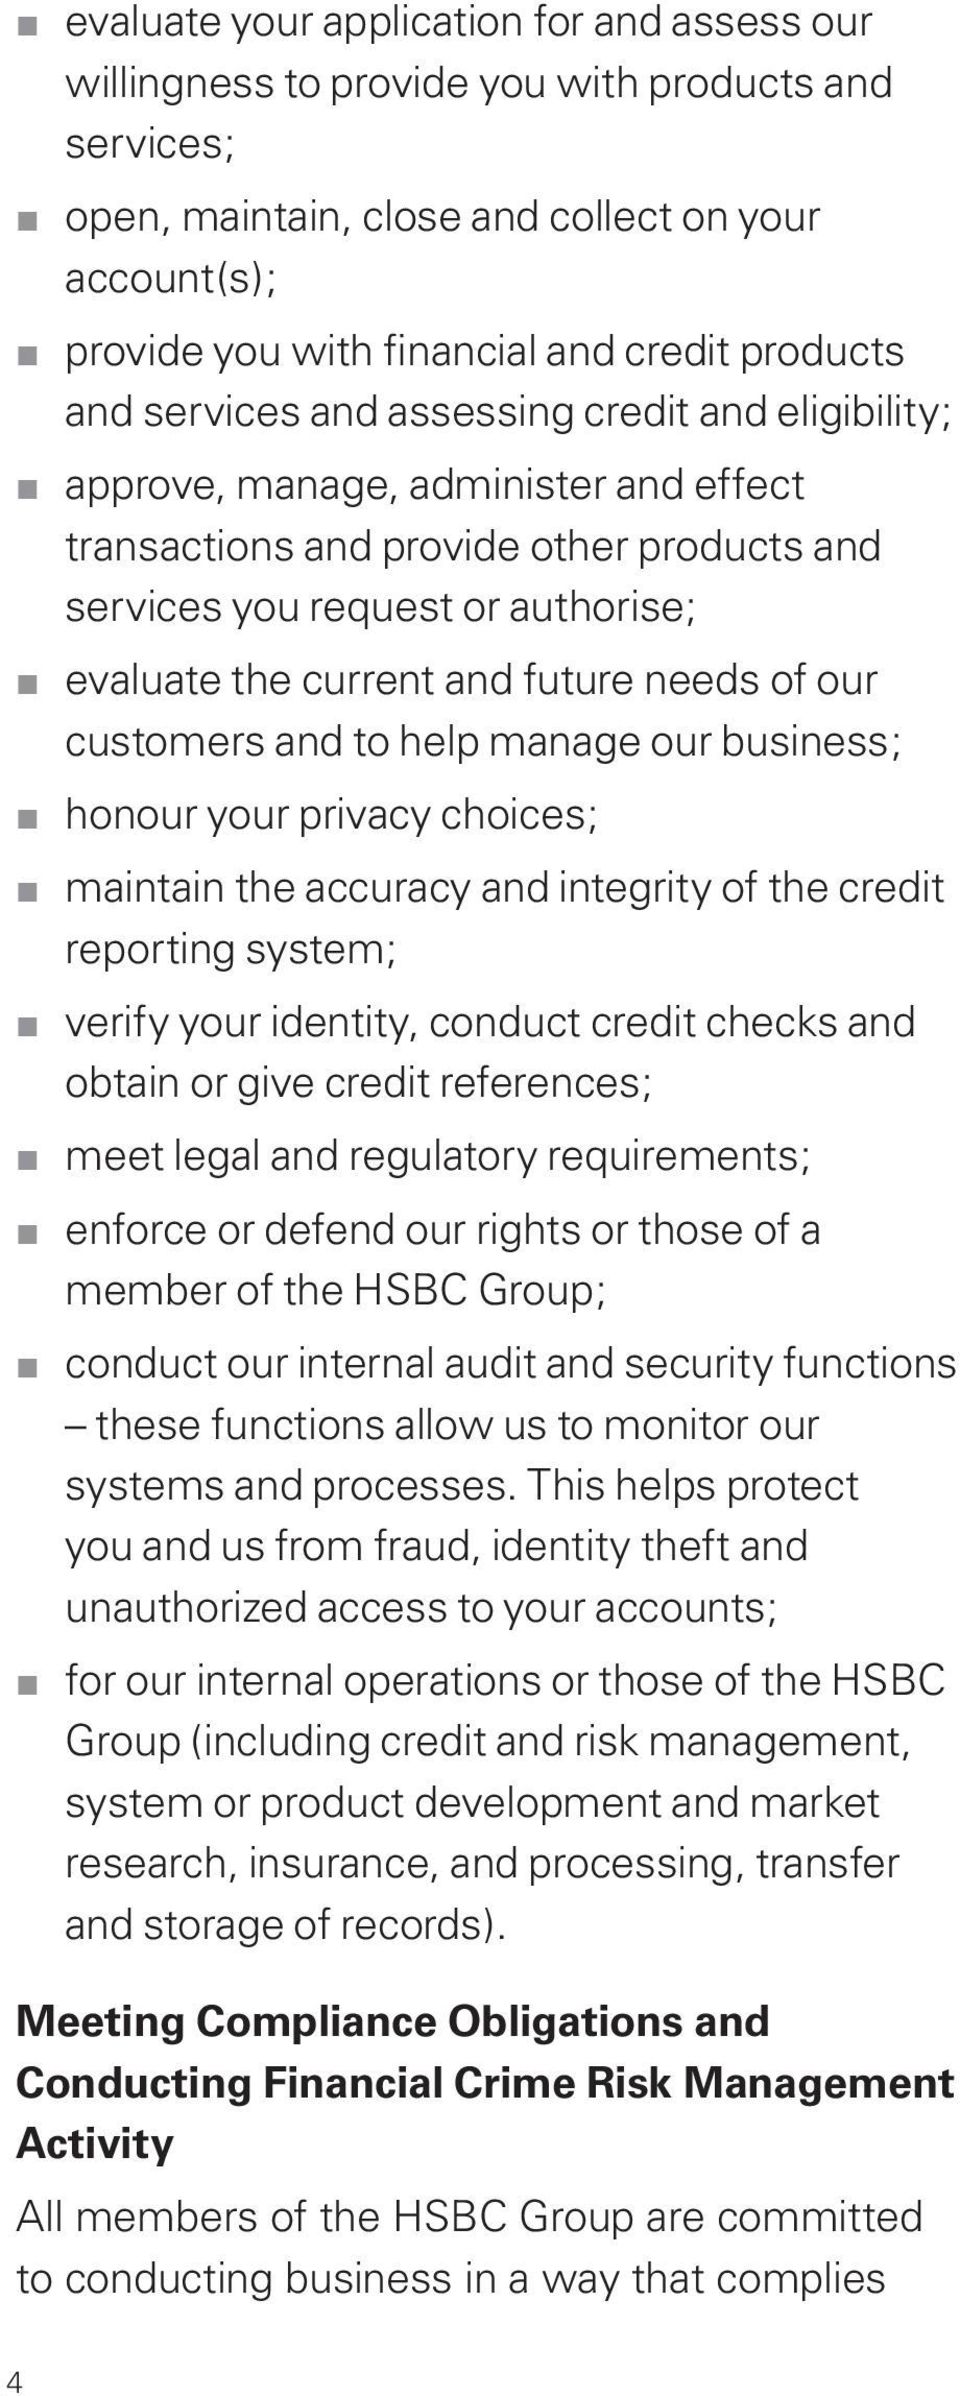 and future needs of our customers and to help manage our business; honour your privacy choices; maintain the accuracy and integrity of the credit reporting system; verify your identity, conduct